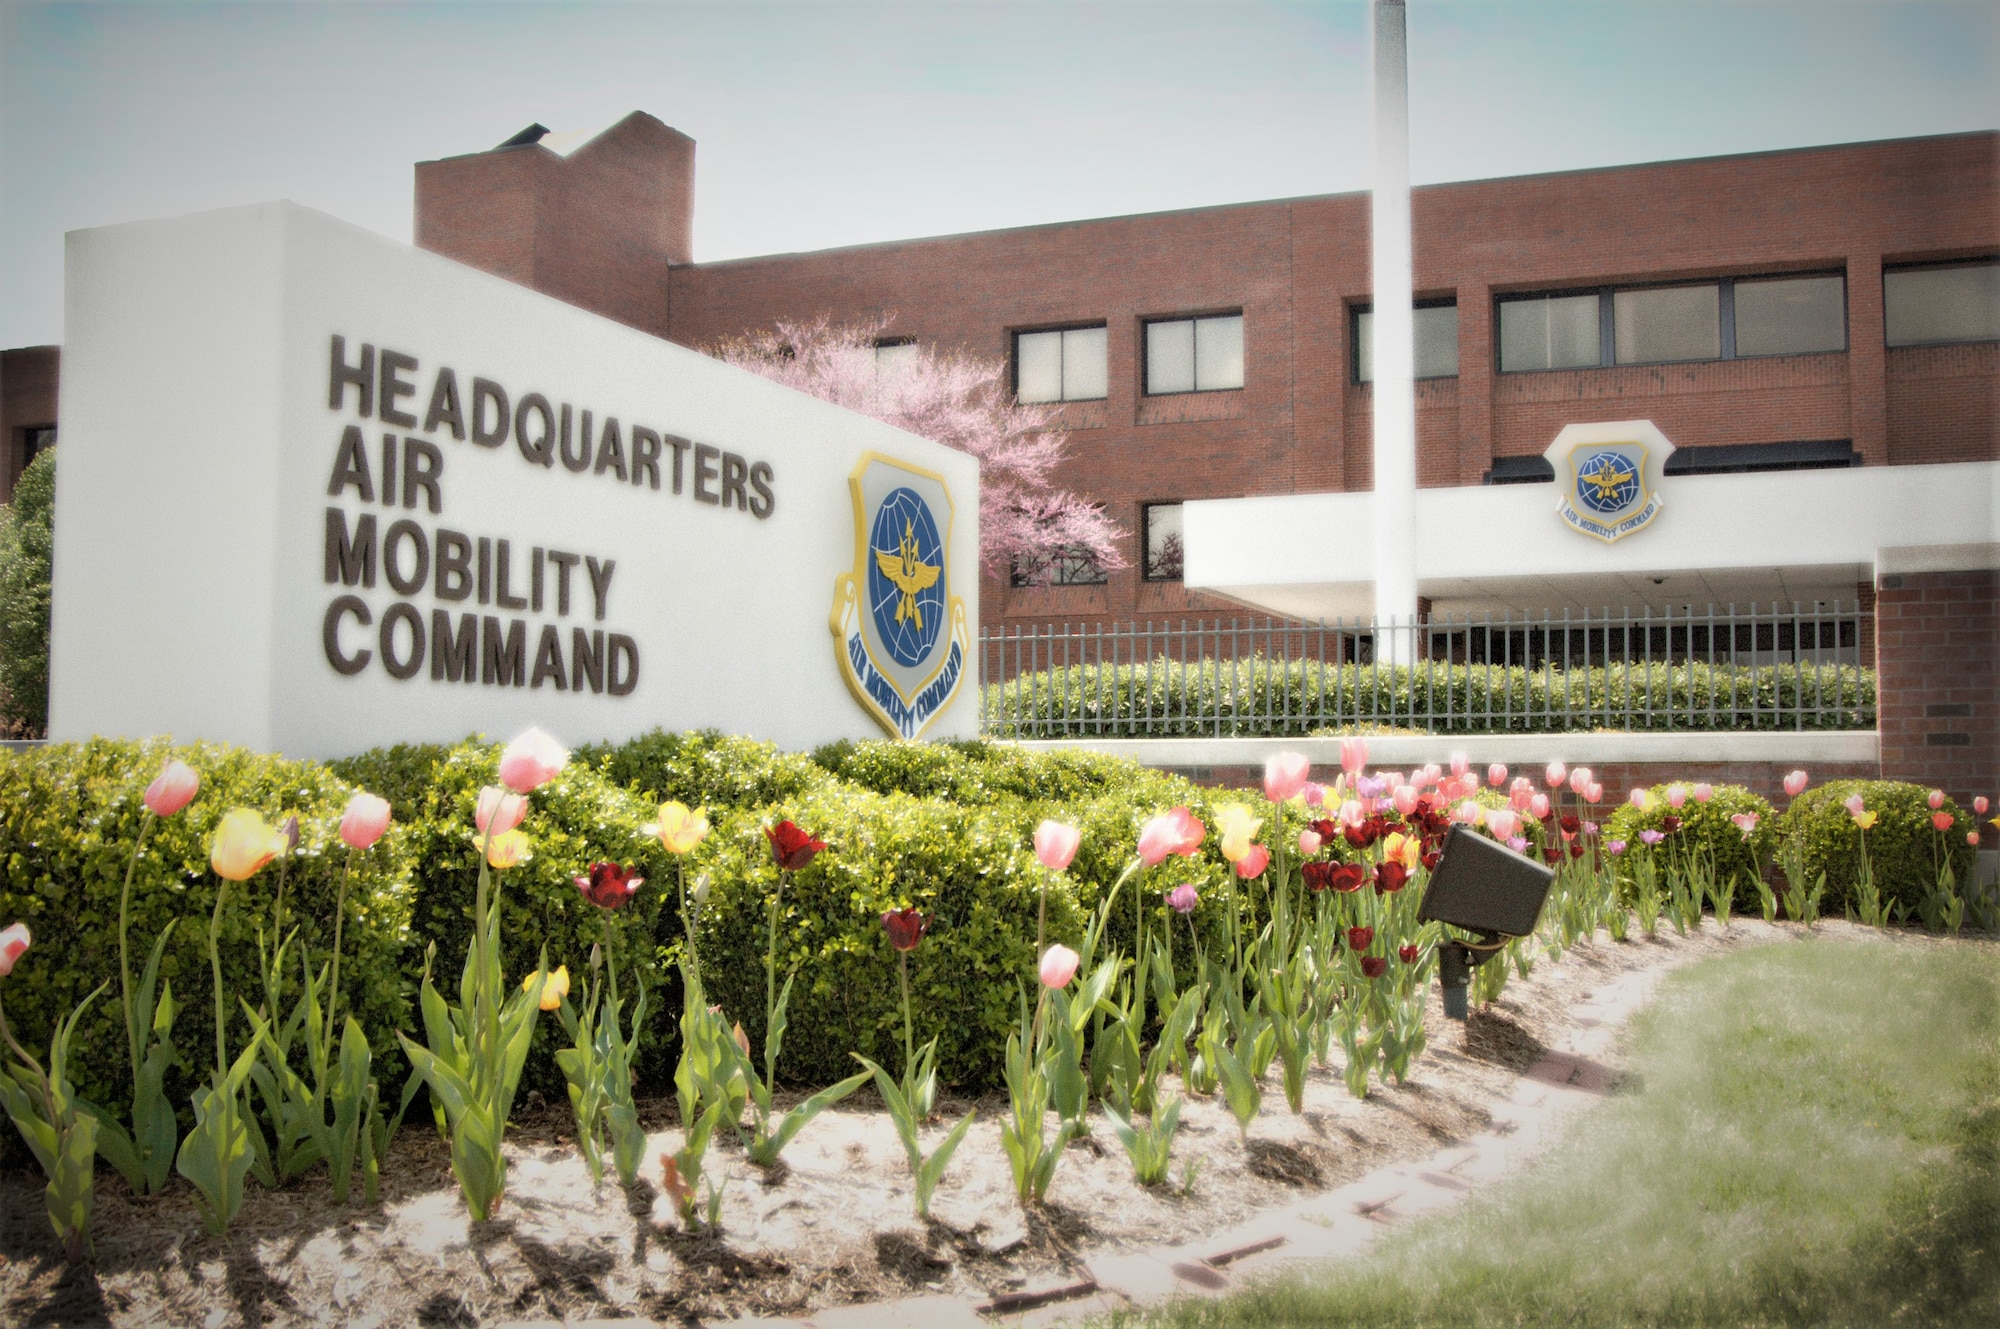 A photo of headquarters Air Mobility Command at Scott Air Force Base, Illinois.